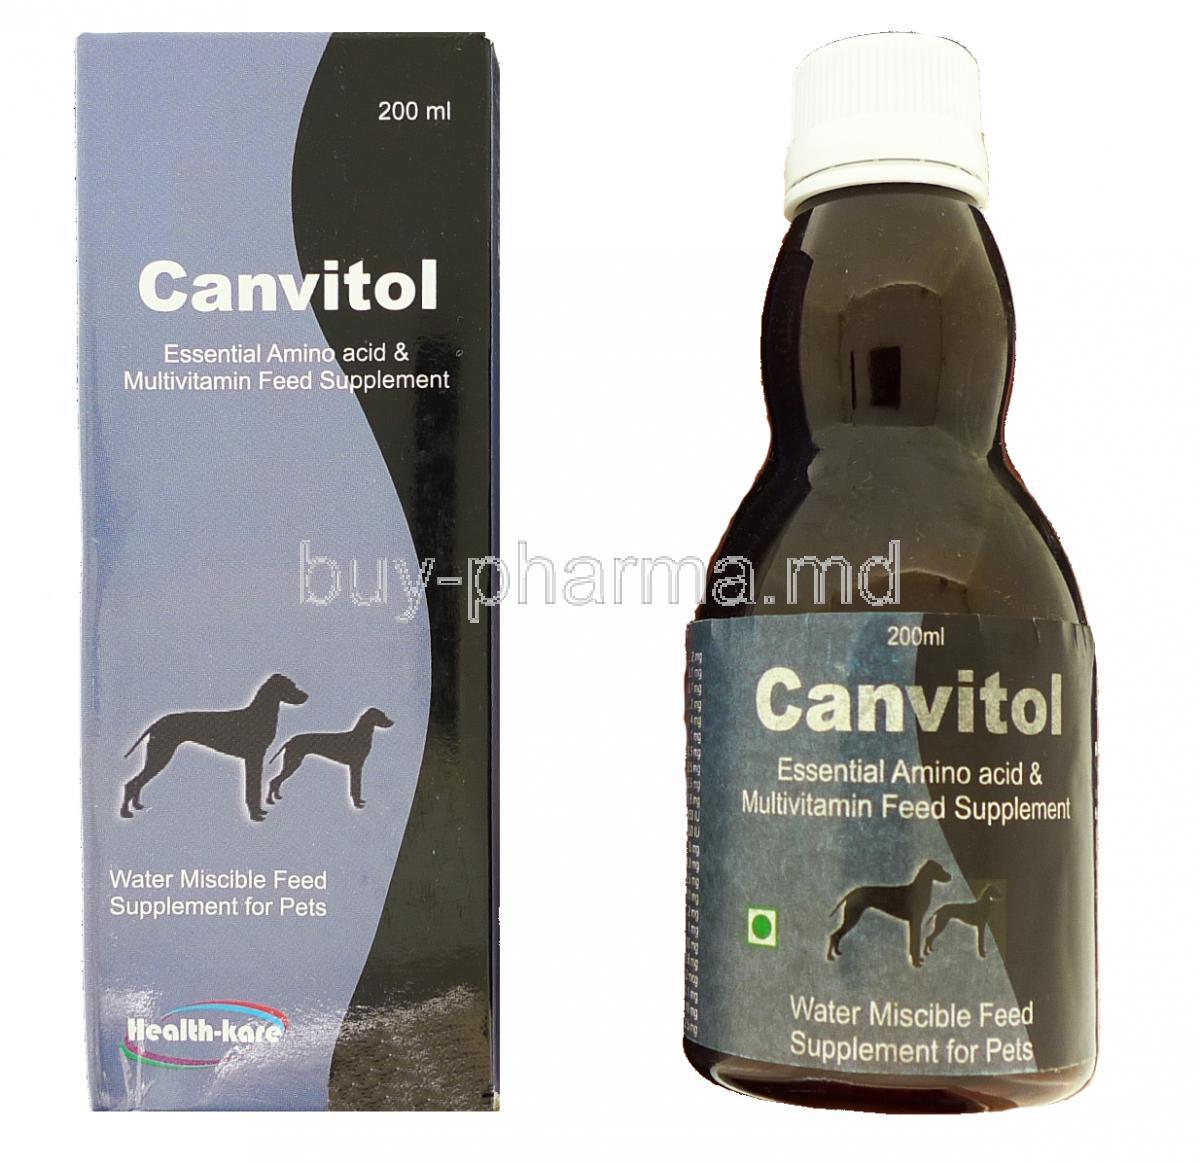 Canvitol 200 ml Syrup